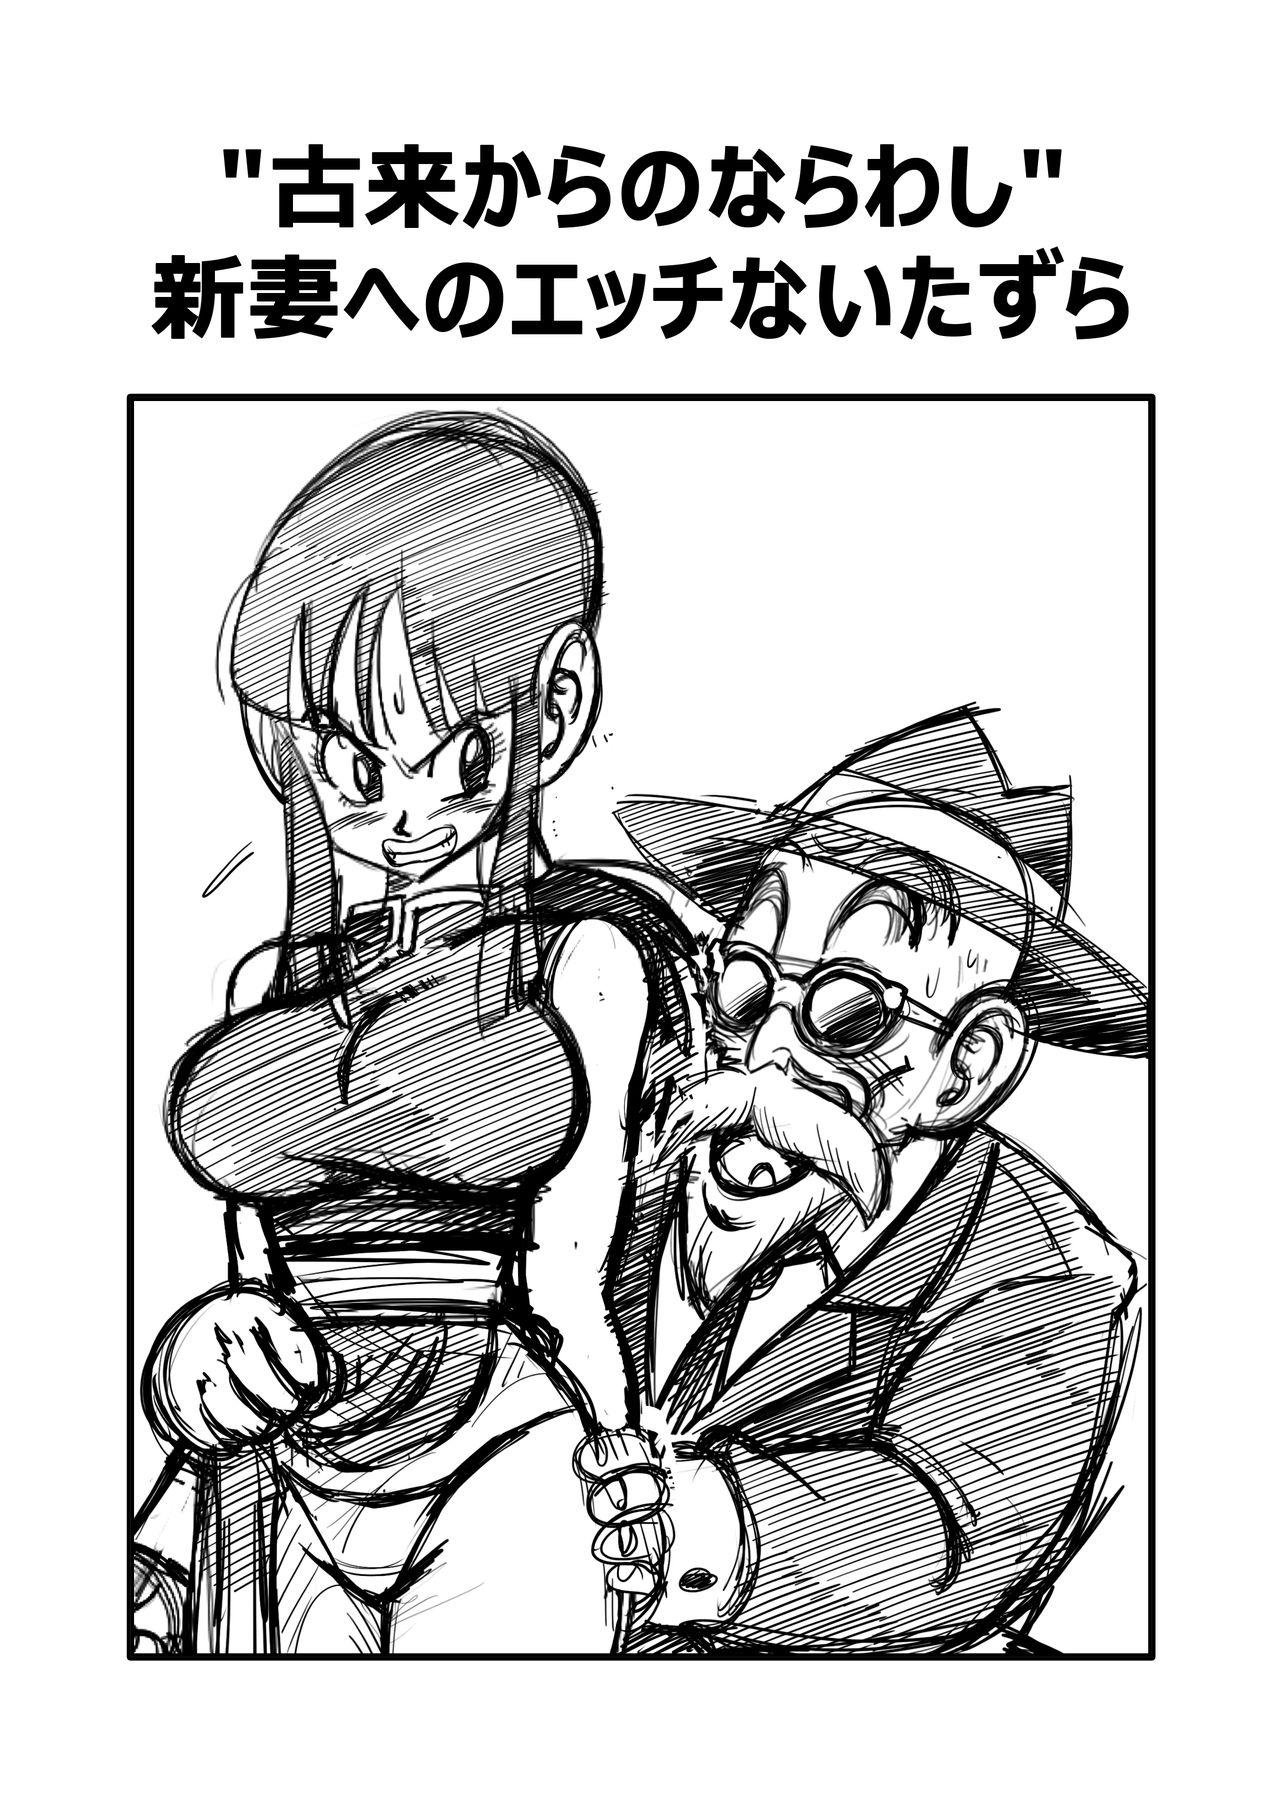 Massive "An Ancient Tradition" - Young Wife is Harassed! - Dragon ball z Adult Toys - Page 3